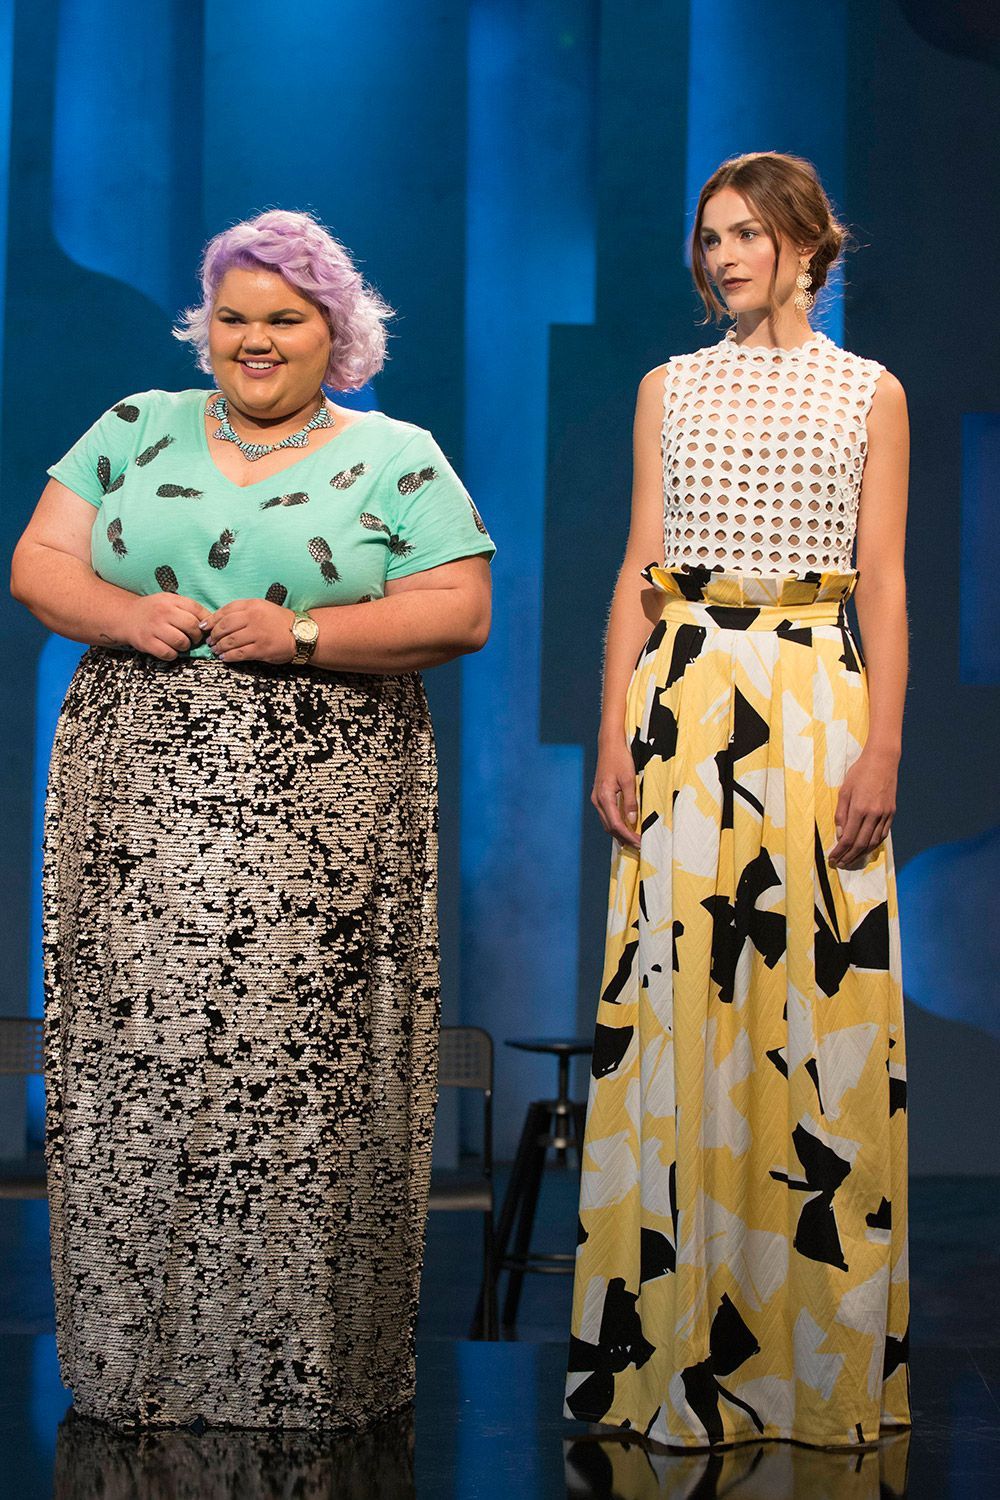 Project Runway Season 14 Episode 1 – I LOVED this outfit from Ashley Nell Tipton, especially the skirt!